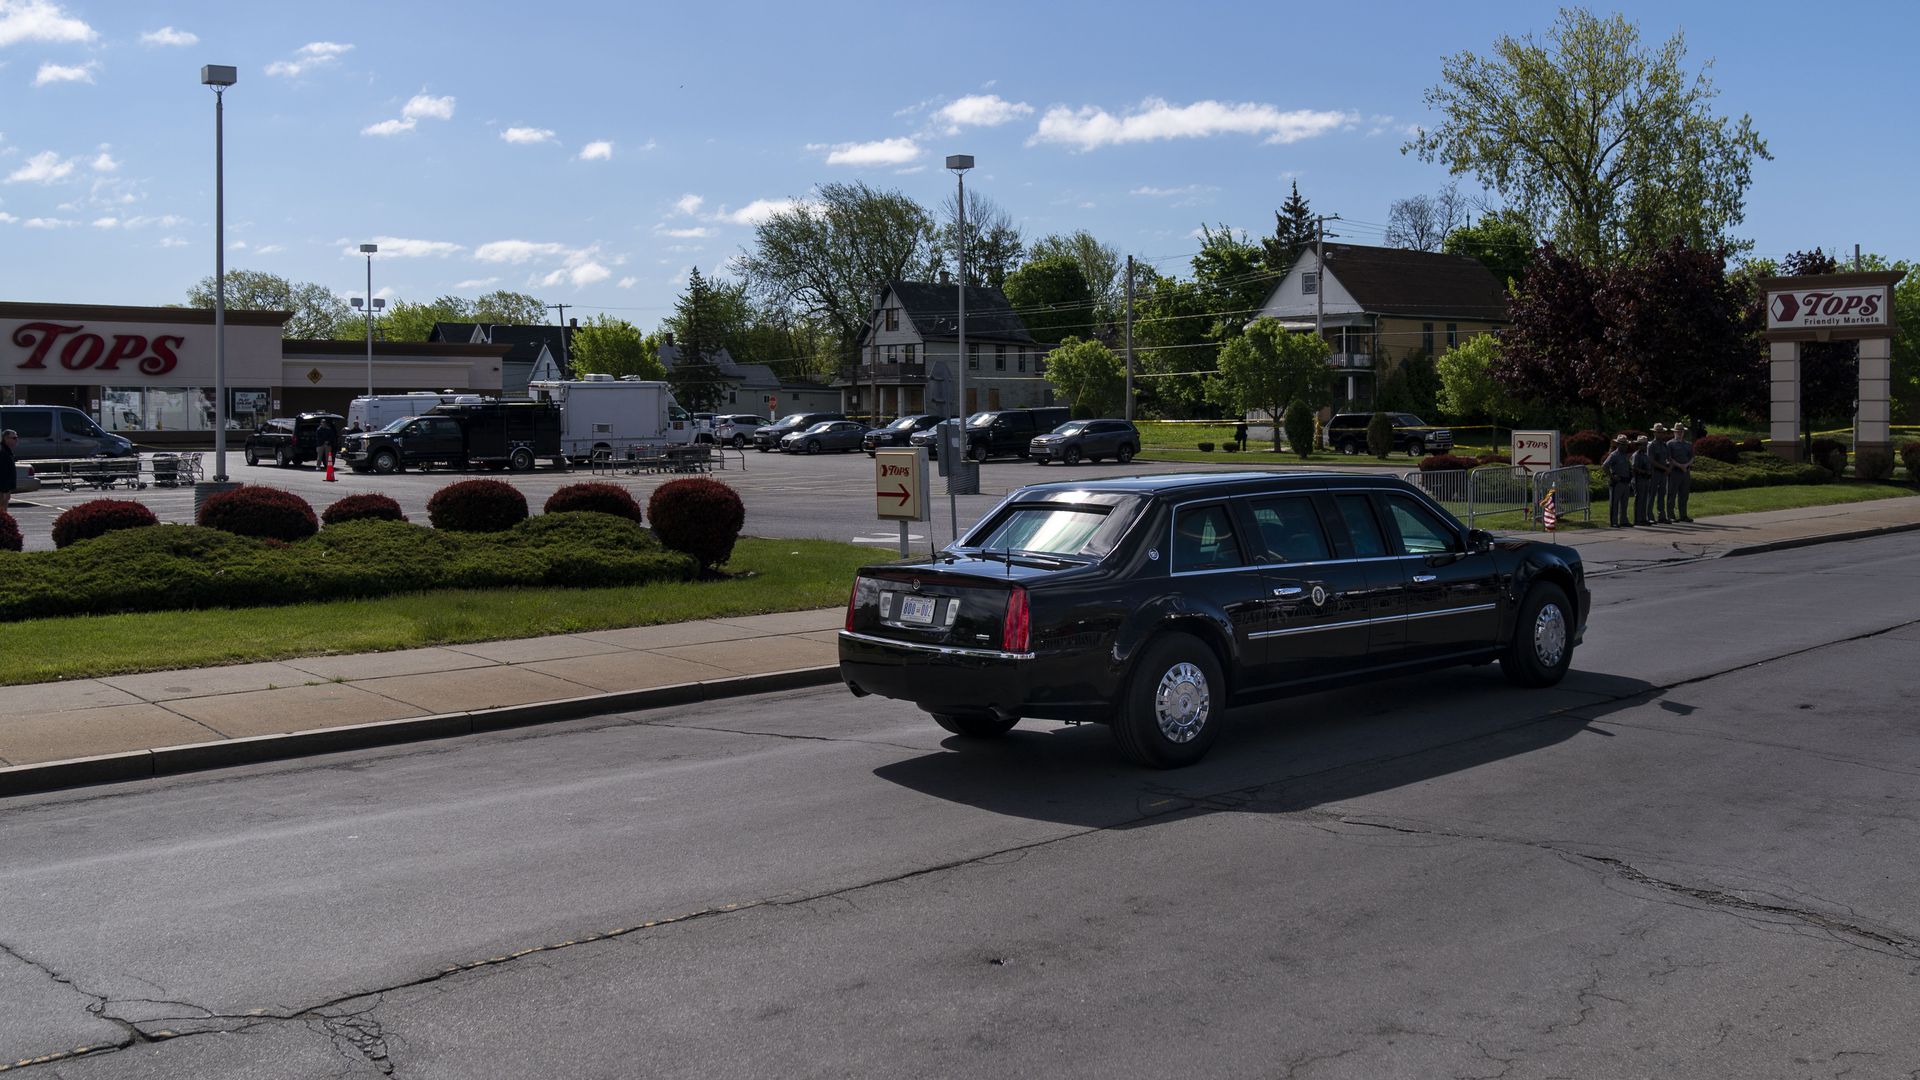 The presidential limousine is seen passing the Tops supermarket in Buffalo.